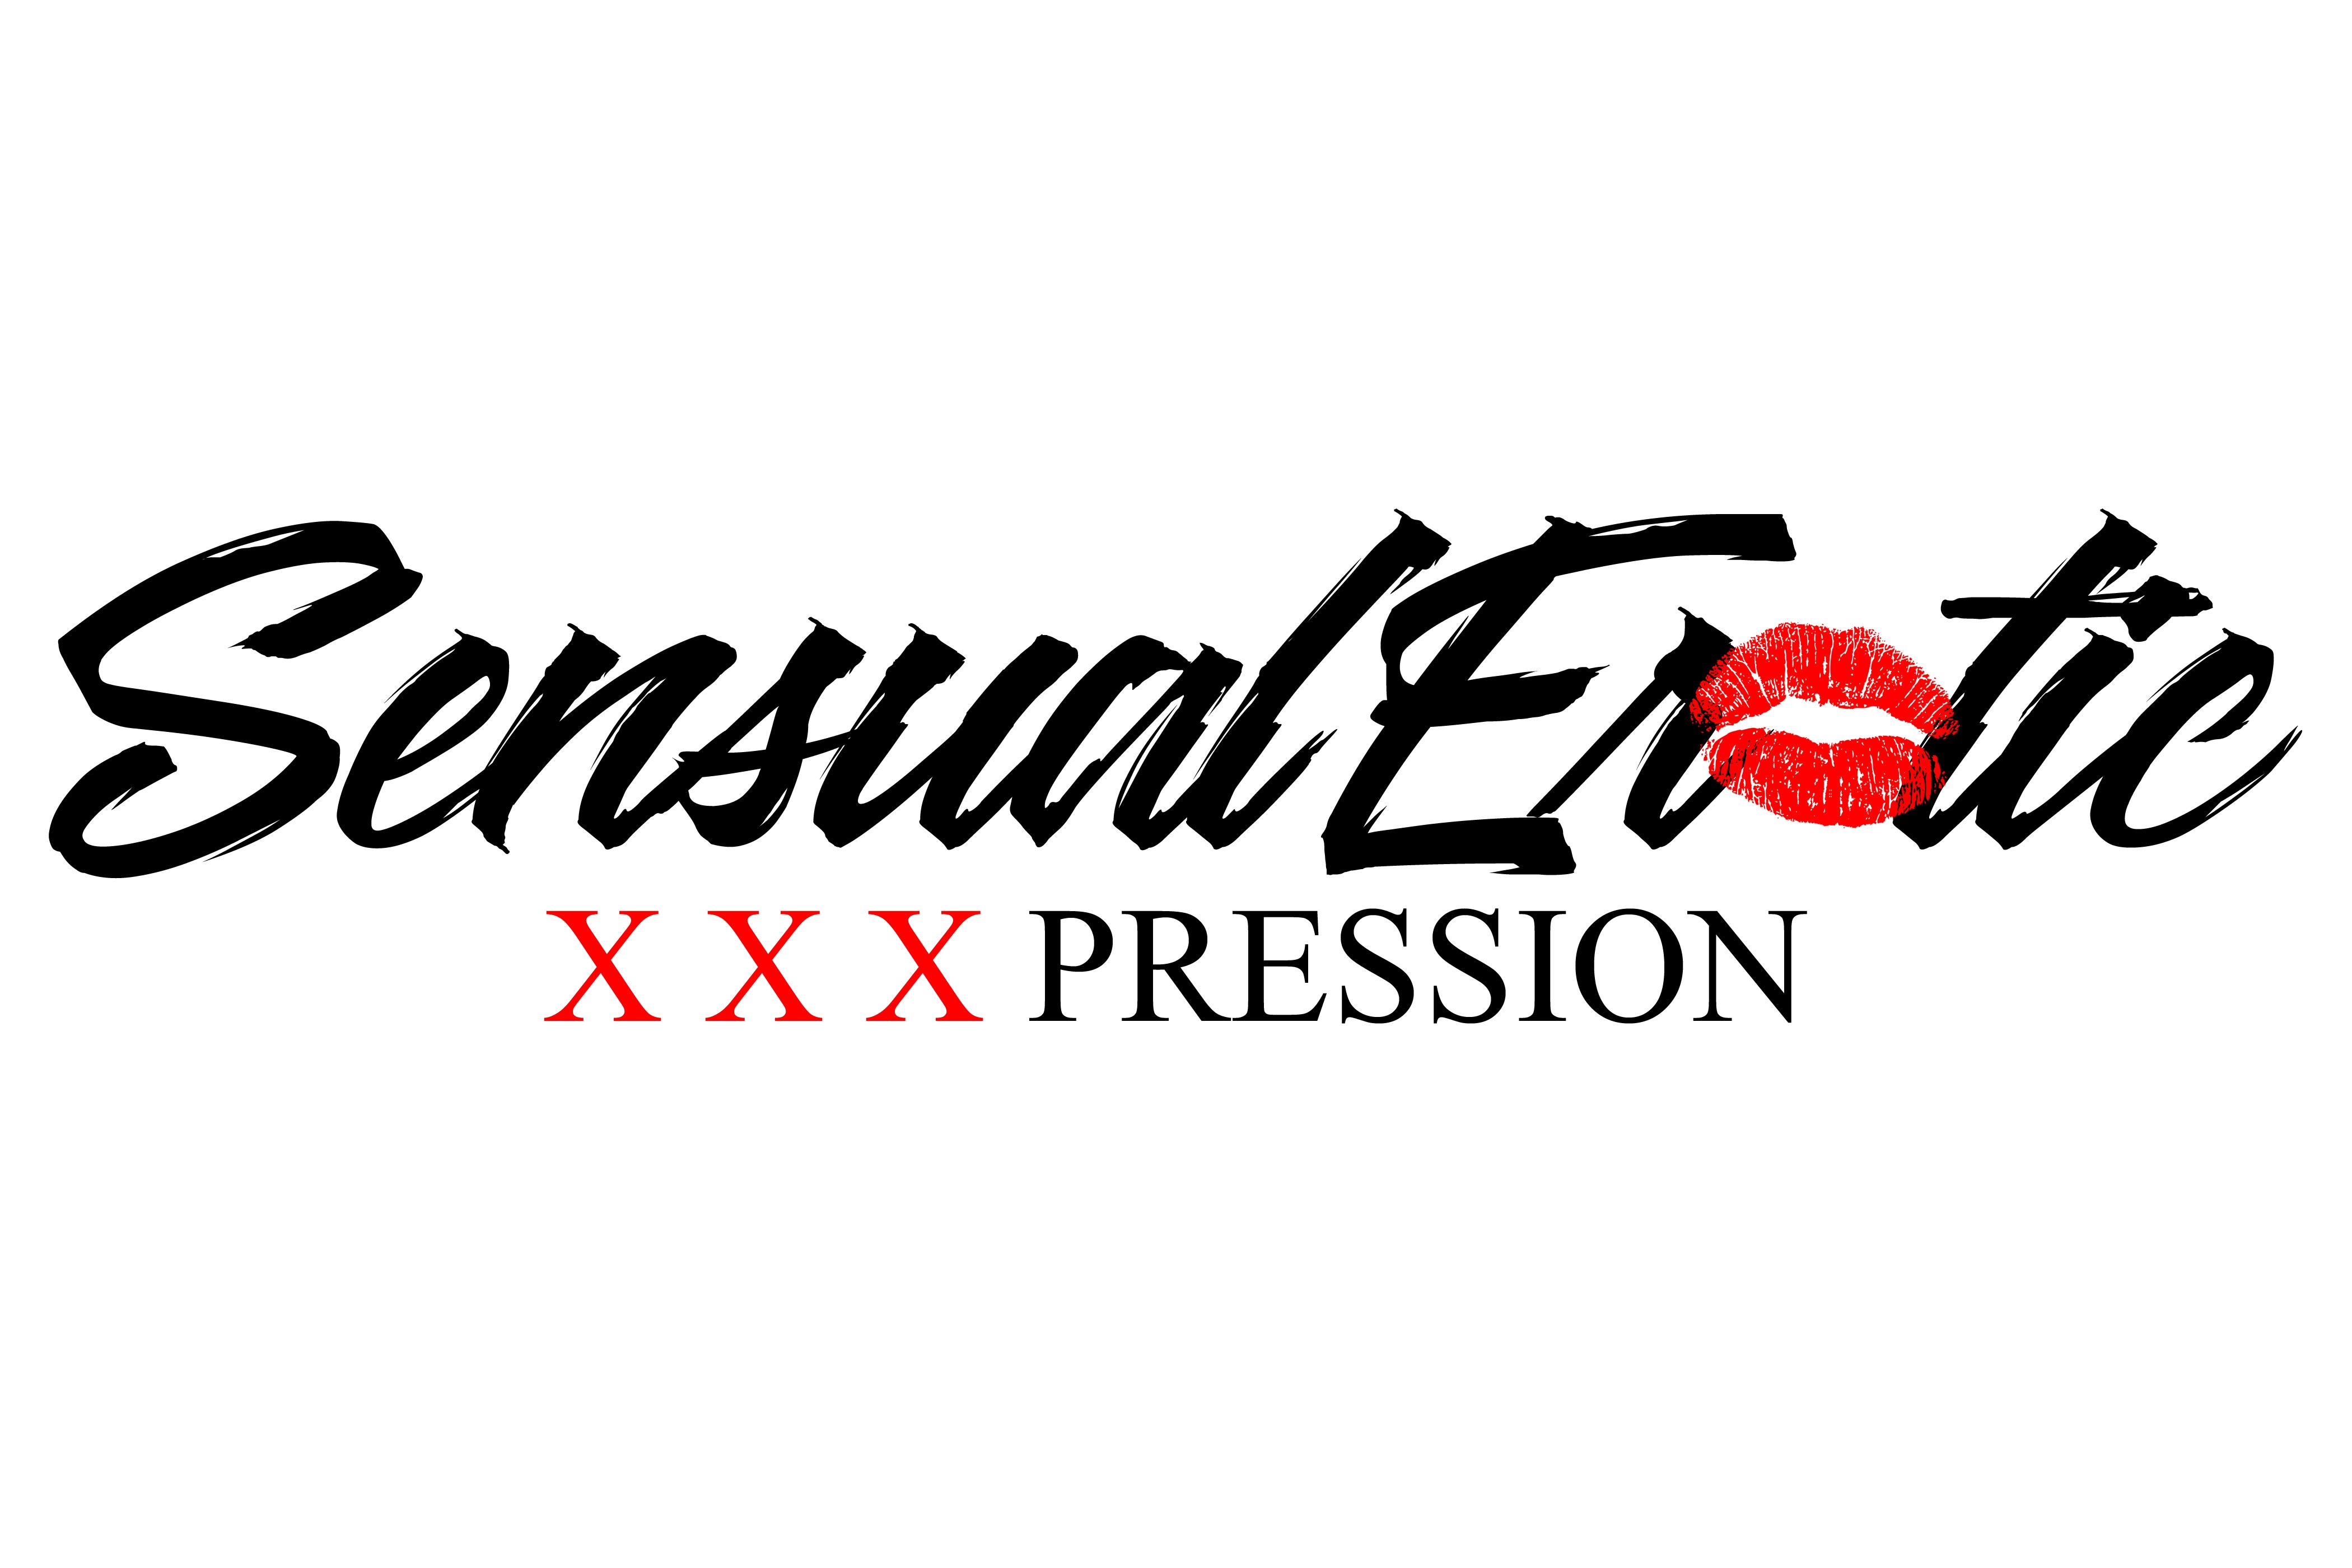 Sensual Erotic Xxxpression The Sex Show Tampa Bay X Rated Edition 10 Jan 2020